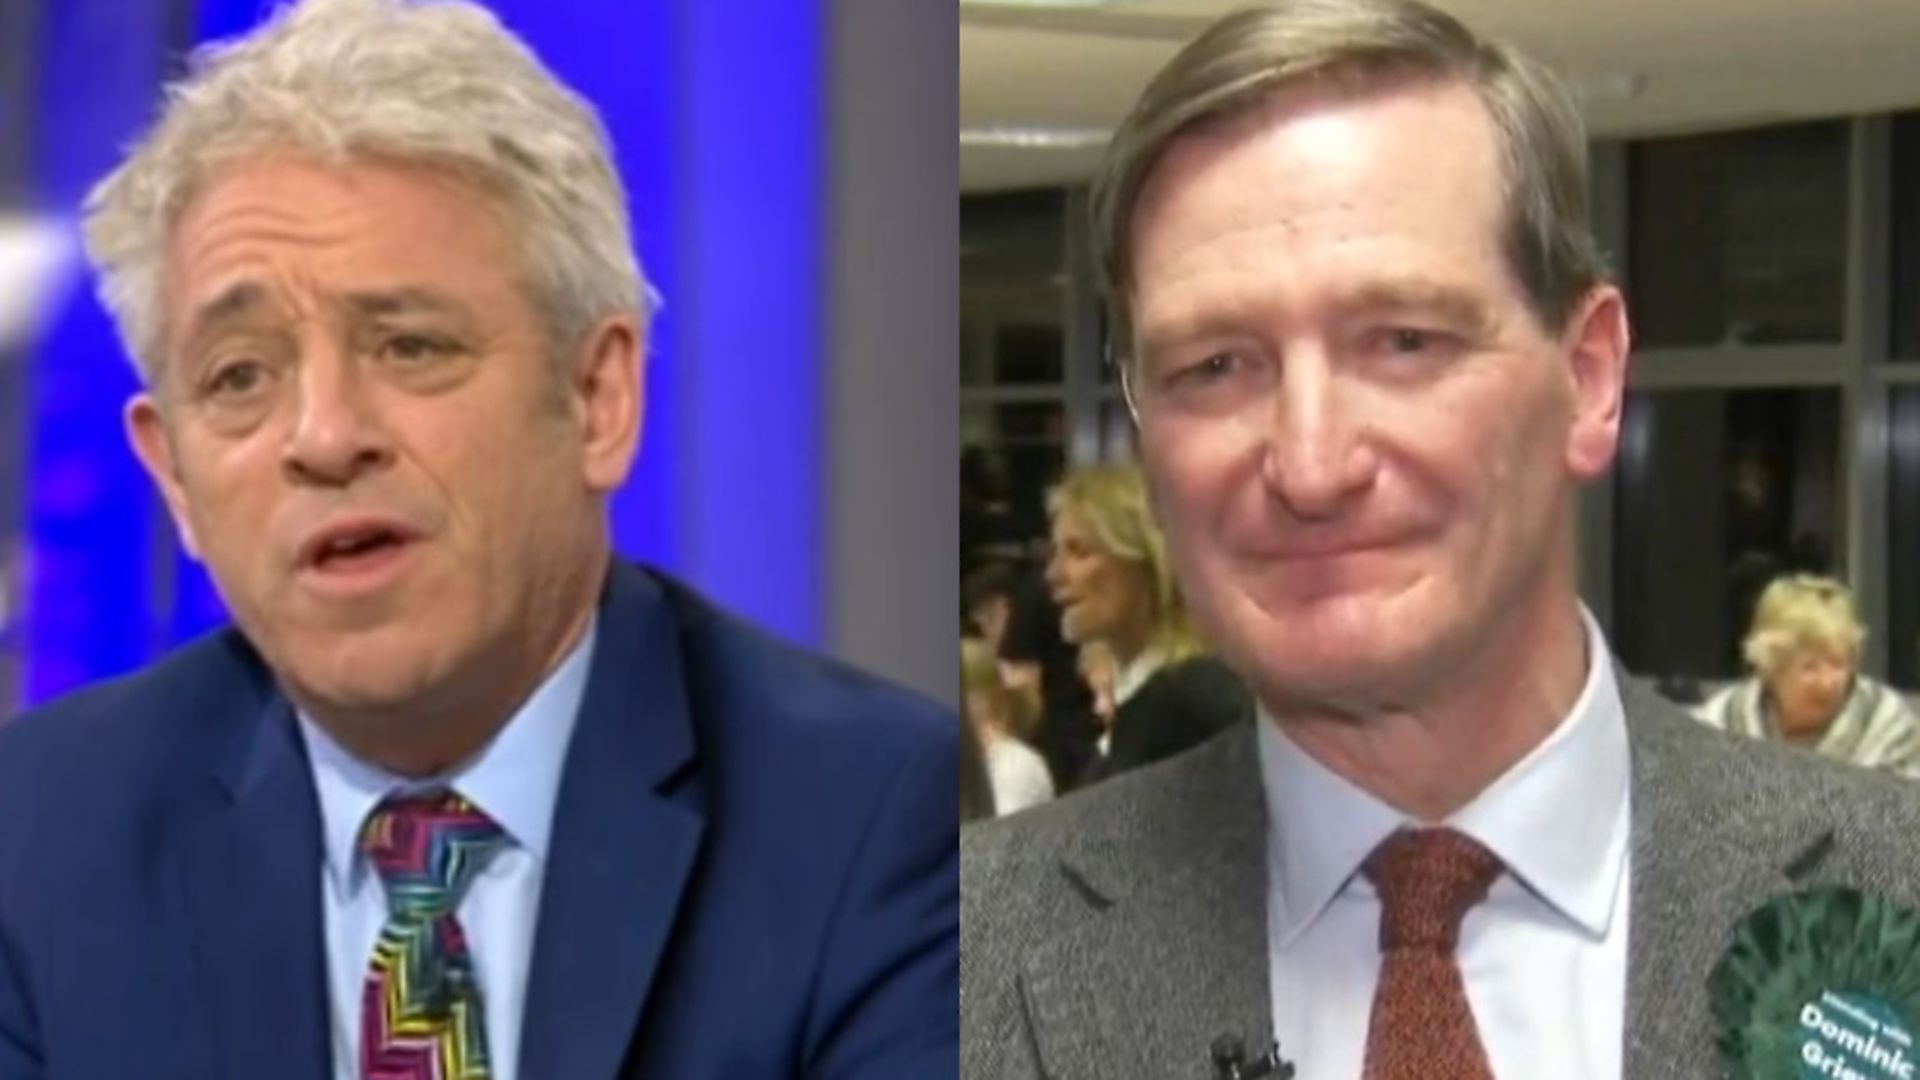 John Bercow seems almost to have reduced Dominic Grieve to tears with his heartfelt tribute on election night. Pictures: Sky - Credit: Sky